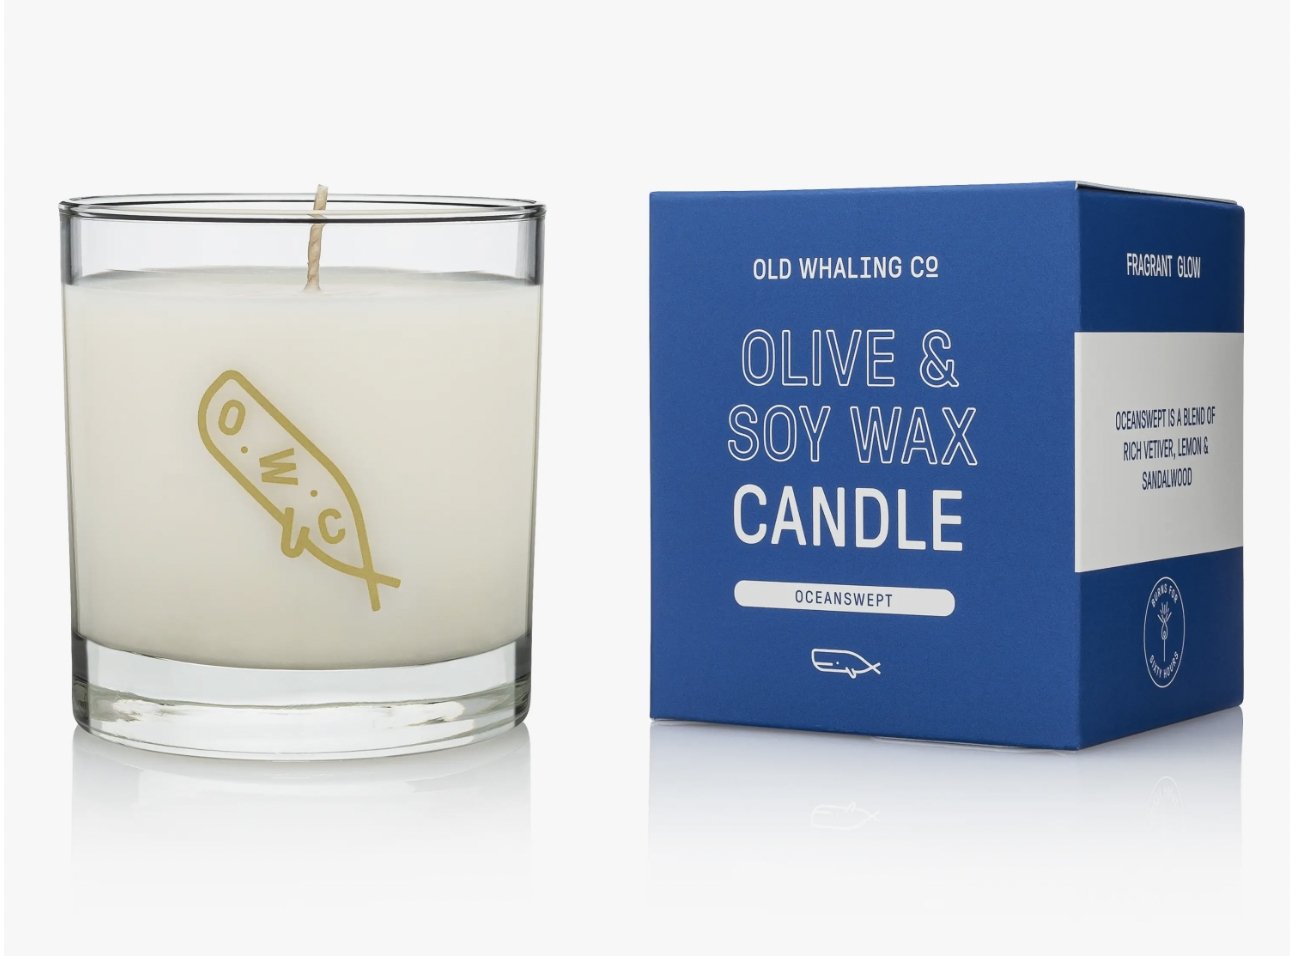 Old Whaling Co. Oceanswept Candle - Essentially Charleston